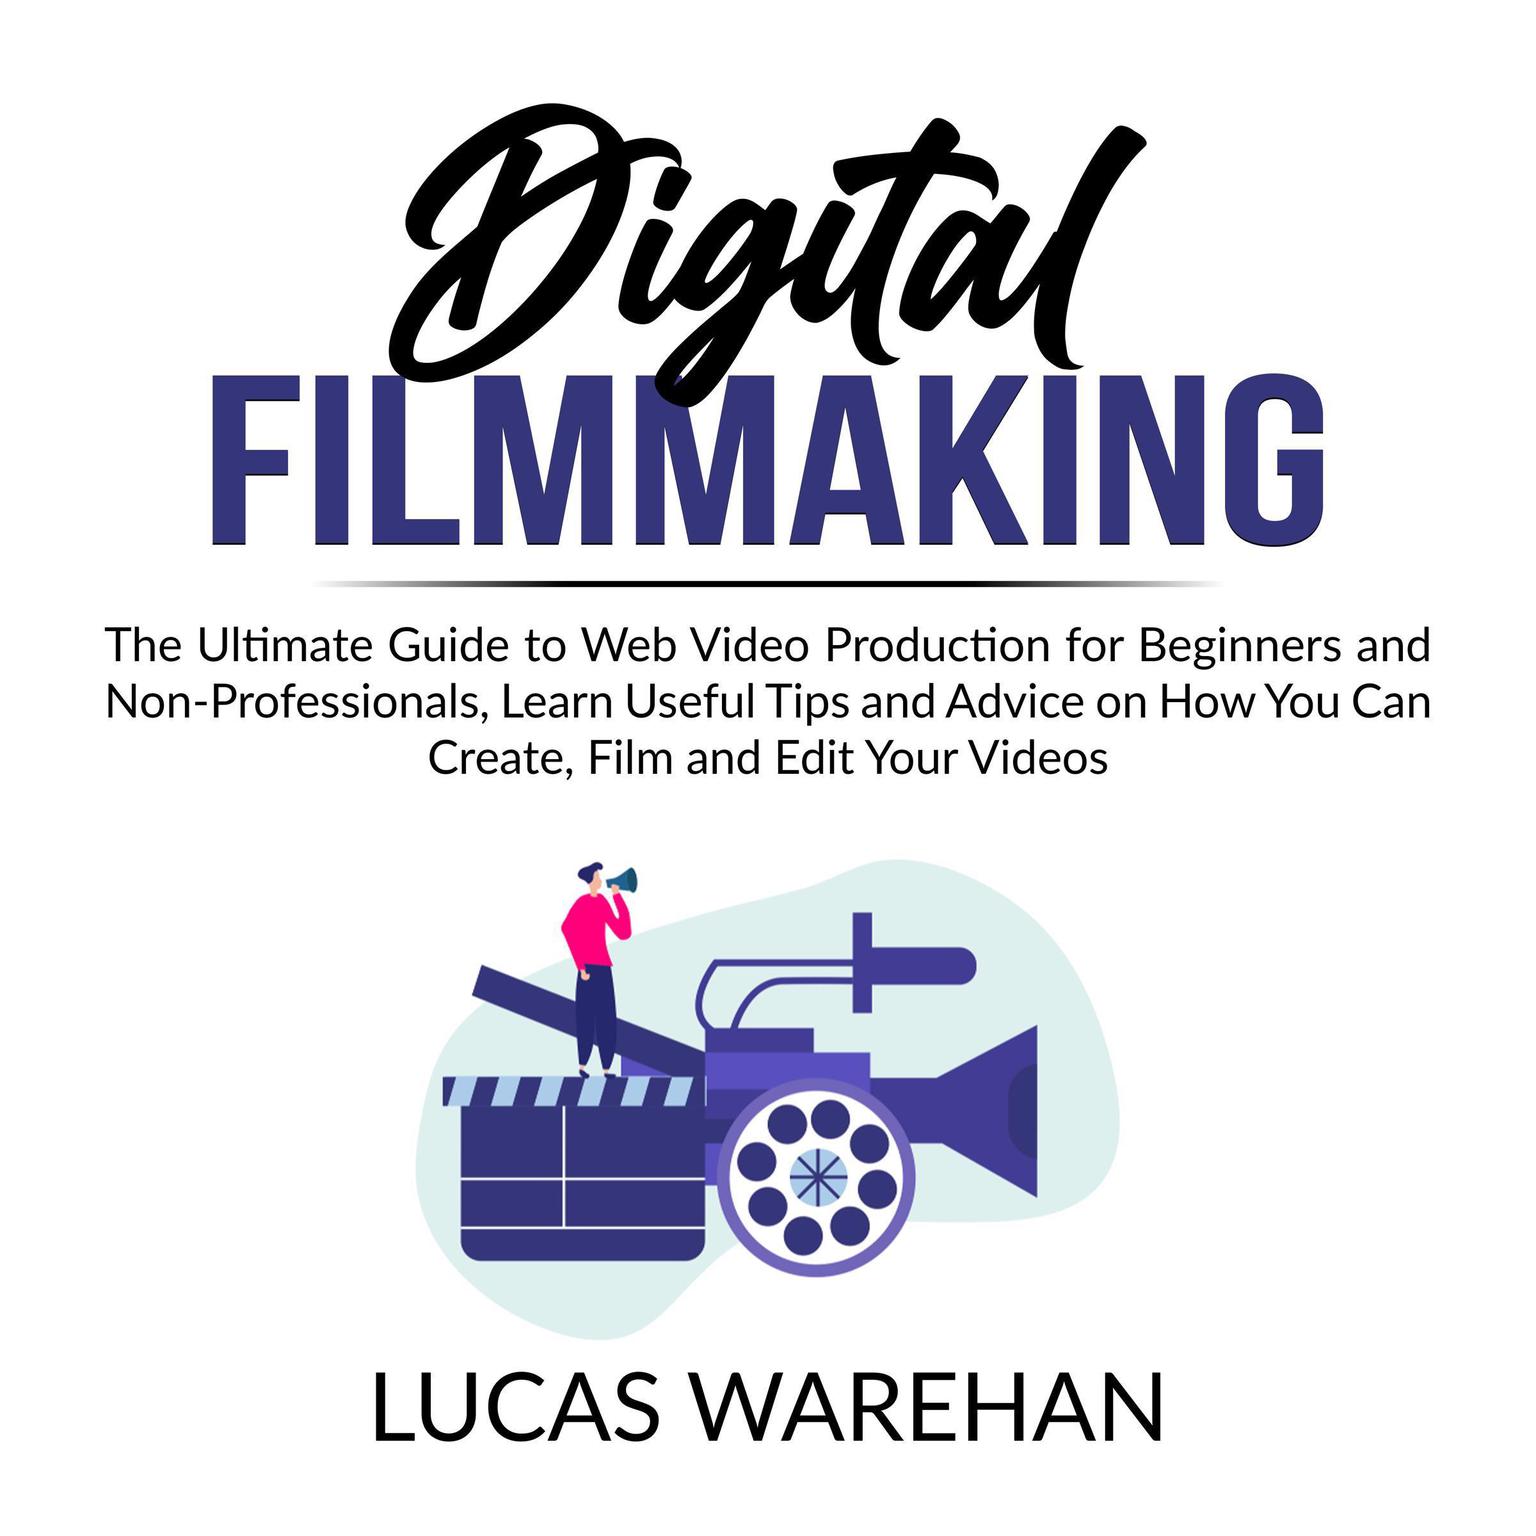 Digital Filmmaking:: The Ultimate Guide to Web Video Production for Beginners and Non-Professionals, Learn Useful Tips and Advice on How You Can Create, Film and Edit Your Videos  Audiobook, by Lucas Warehan